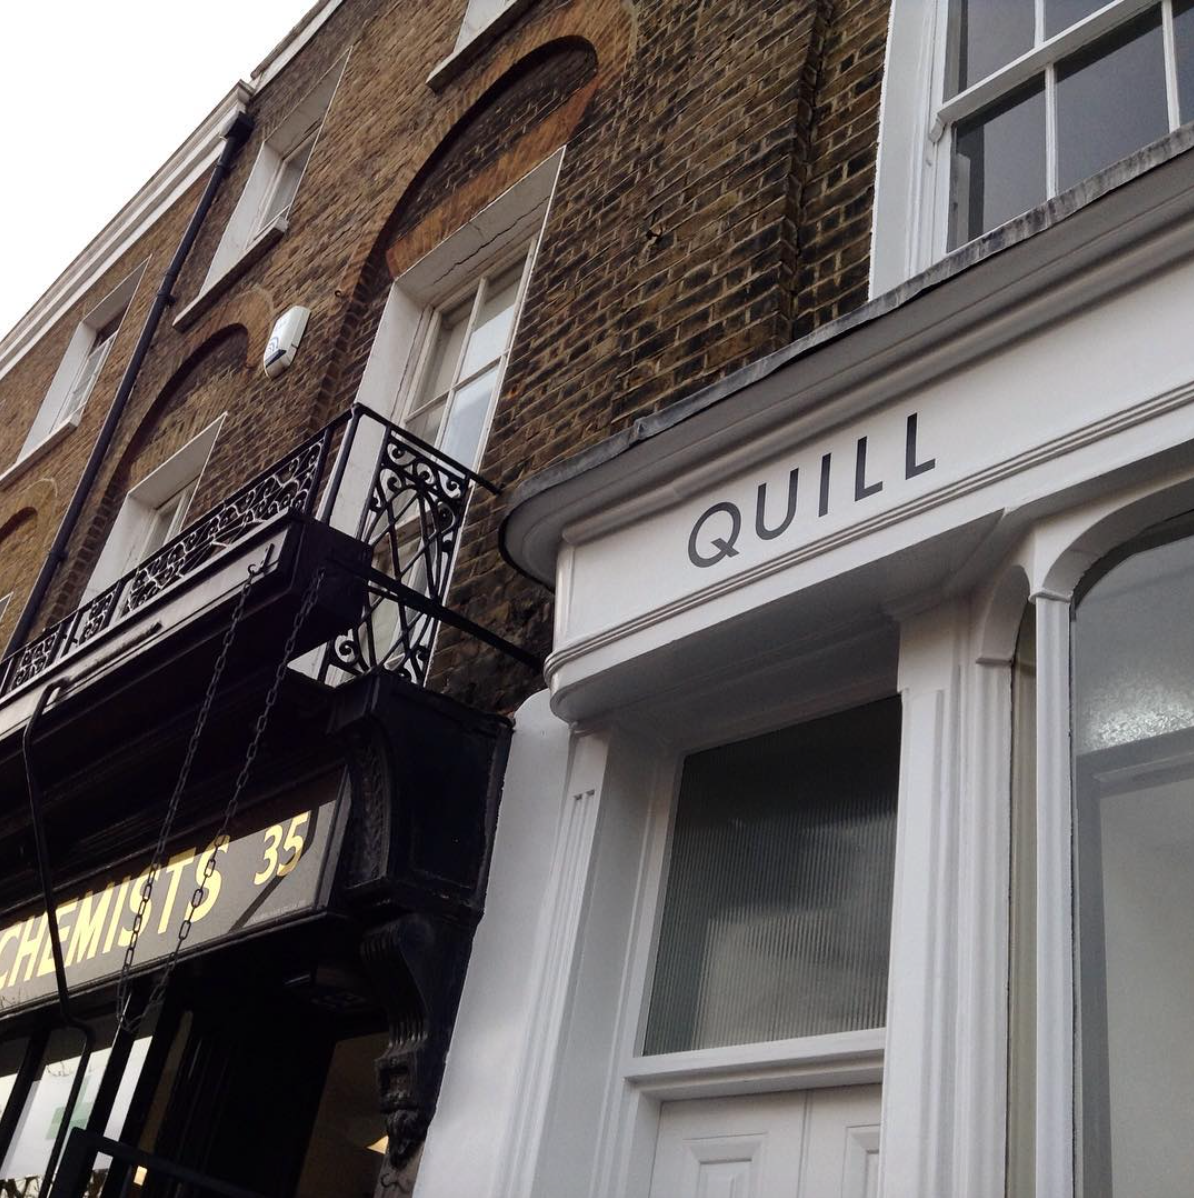 Quill London Shop